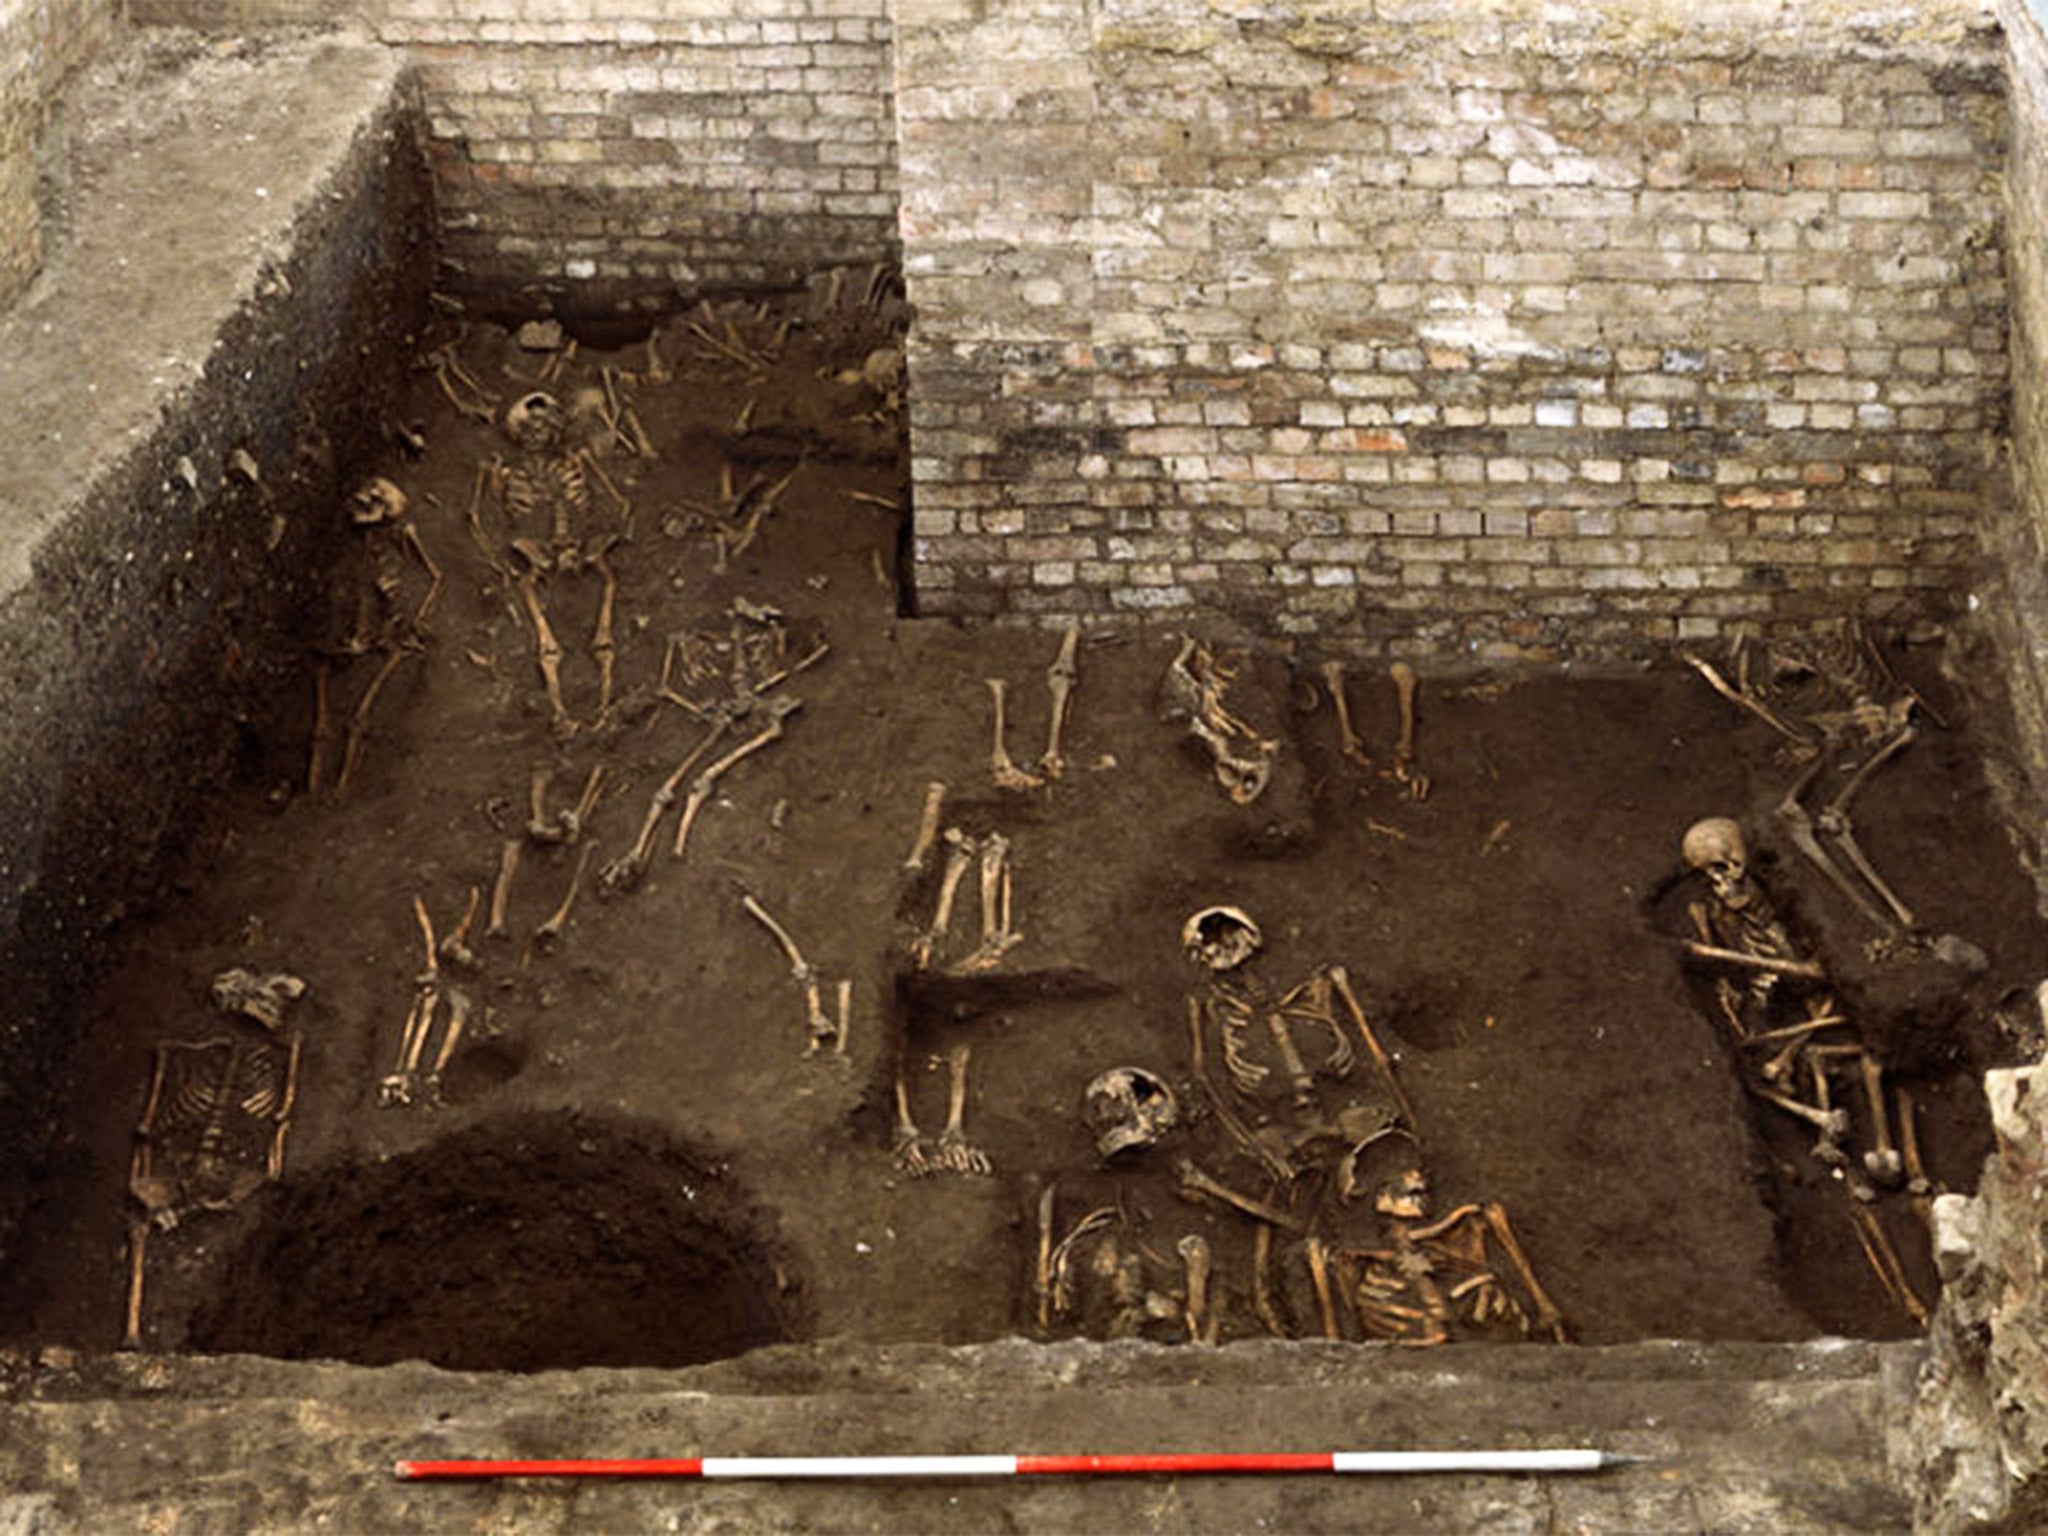 The remains of more than 1,000 people were unearthed beneath the Old Divinity School at St John’s College, University of Cambridge